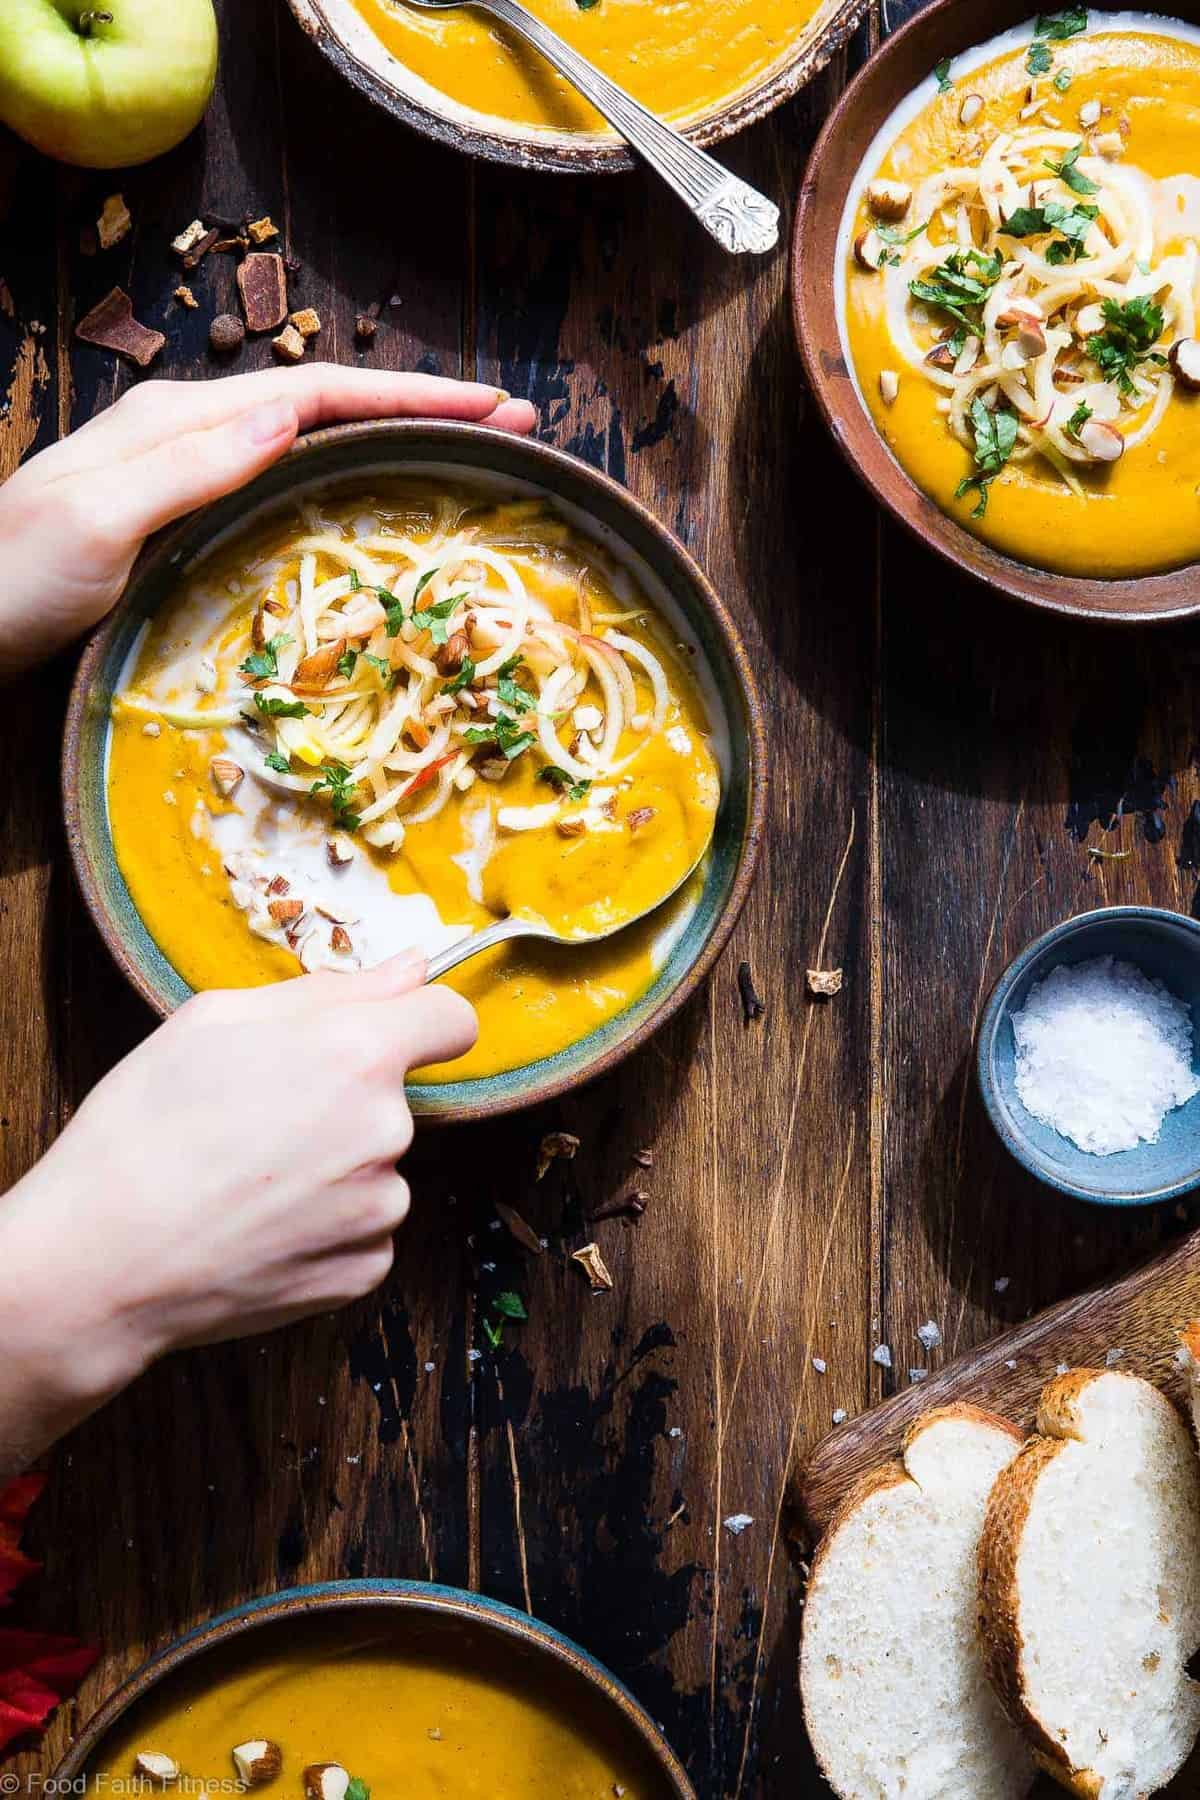 Slow Cooker Creamy Fall Vegan Sweet Potato Soup - this healthy slow cooker sweet potato soup recipe is made in the crock pot for an EASY weeknight dinner that is loaded with spicy-sweet, cozy flavor! Gluten free, paleo and SO creamy and delicious! | #Foodfaithfitness | #Paleo #Glutenfree #Vegan #Dairyfree #slowcooker